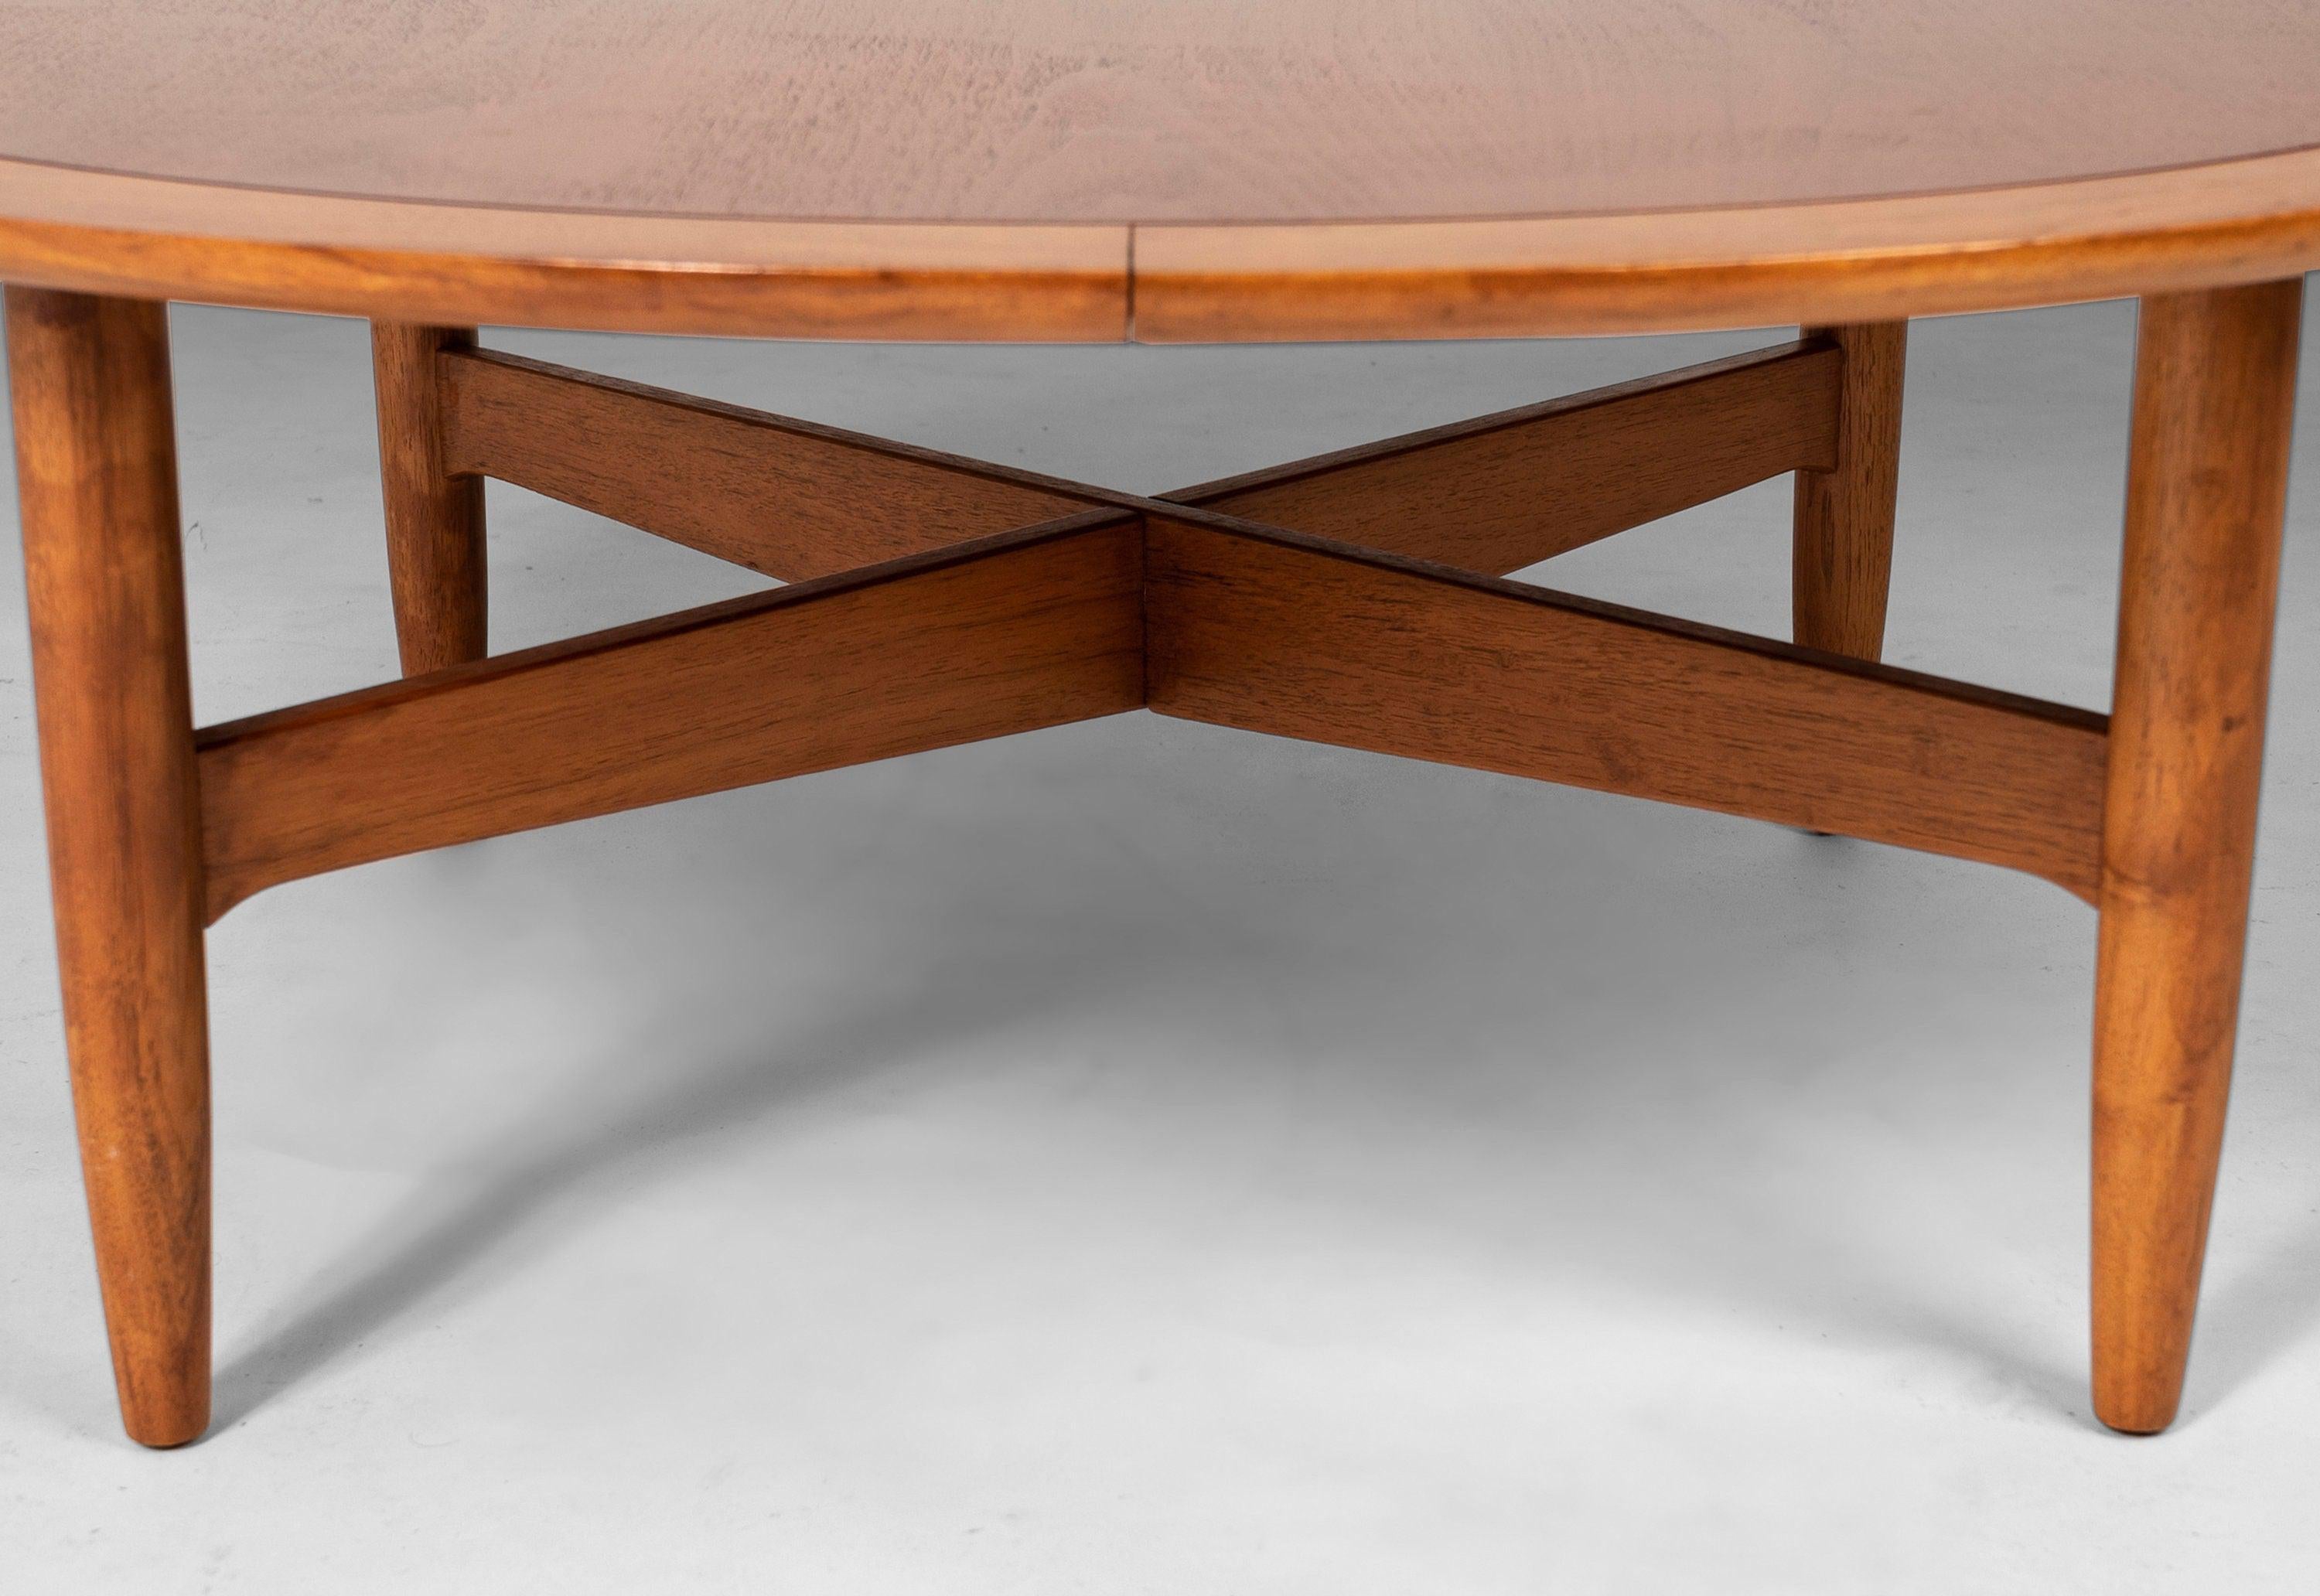 A truly exceptional build and architectural design. This coffee table is constructed from pecan having been created from a hand-picked selection of the finest cuts. A large round top provides ample room for drinks or coffee table books. The table is